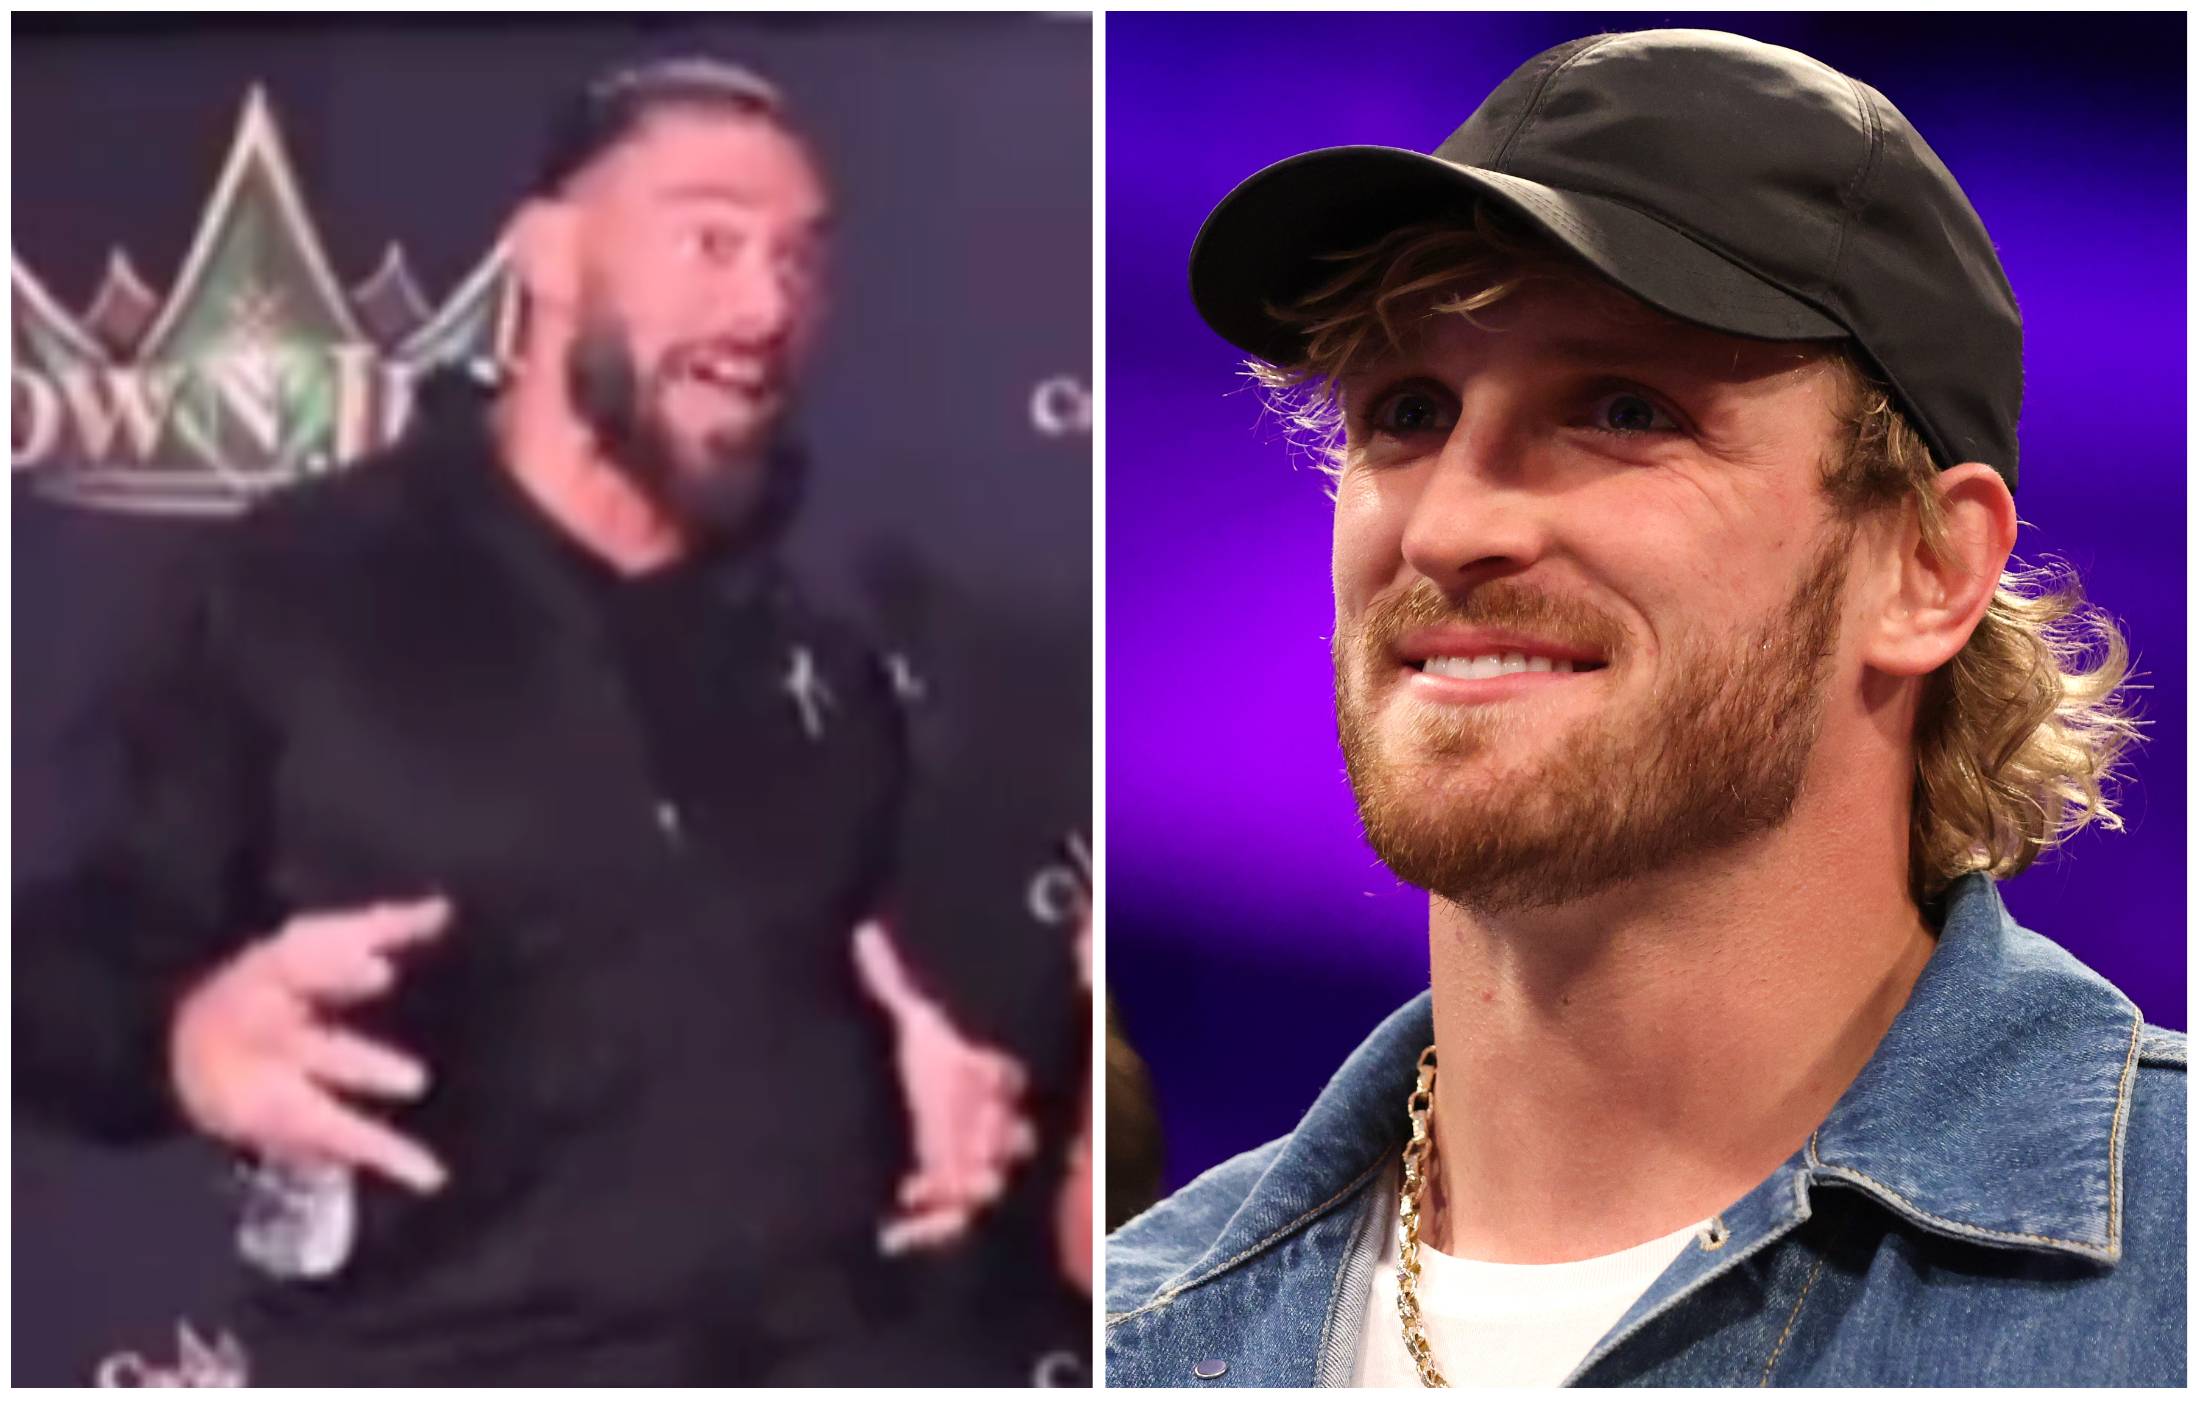 Roman Reigns violated Logan Paul at the WWE press conference yesterday